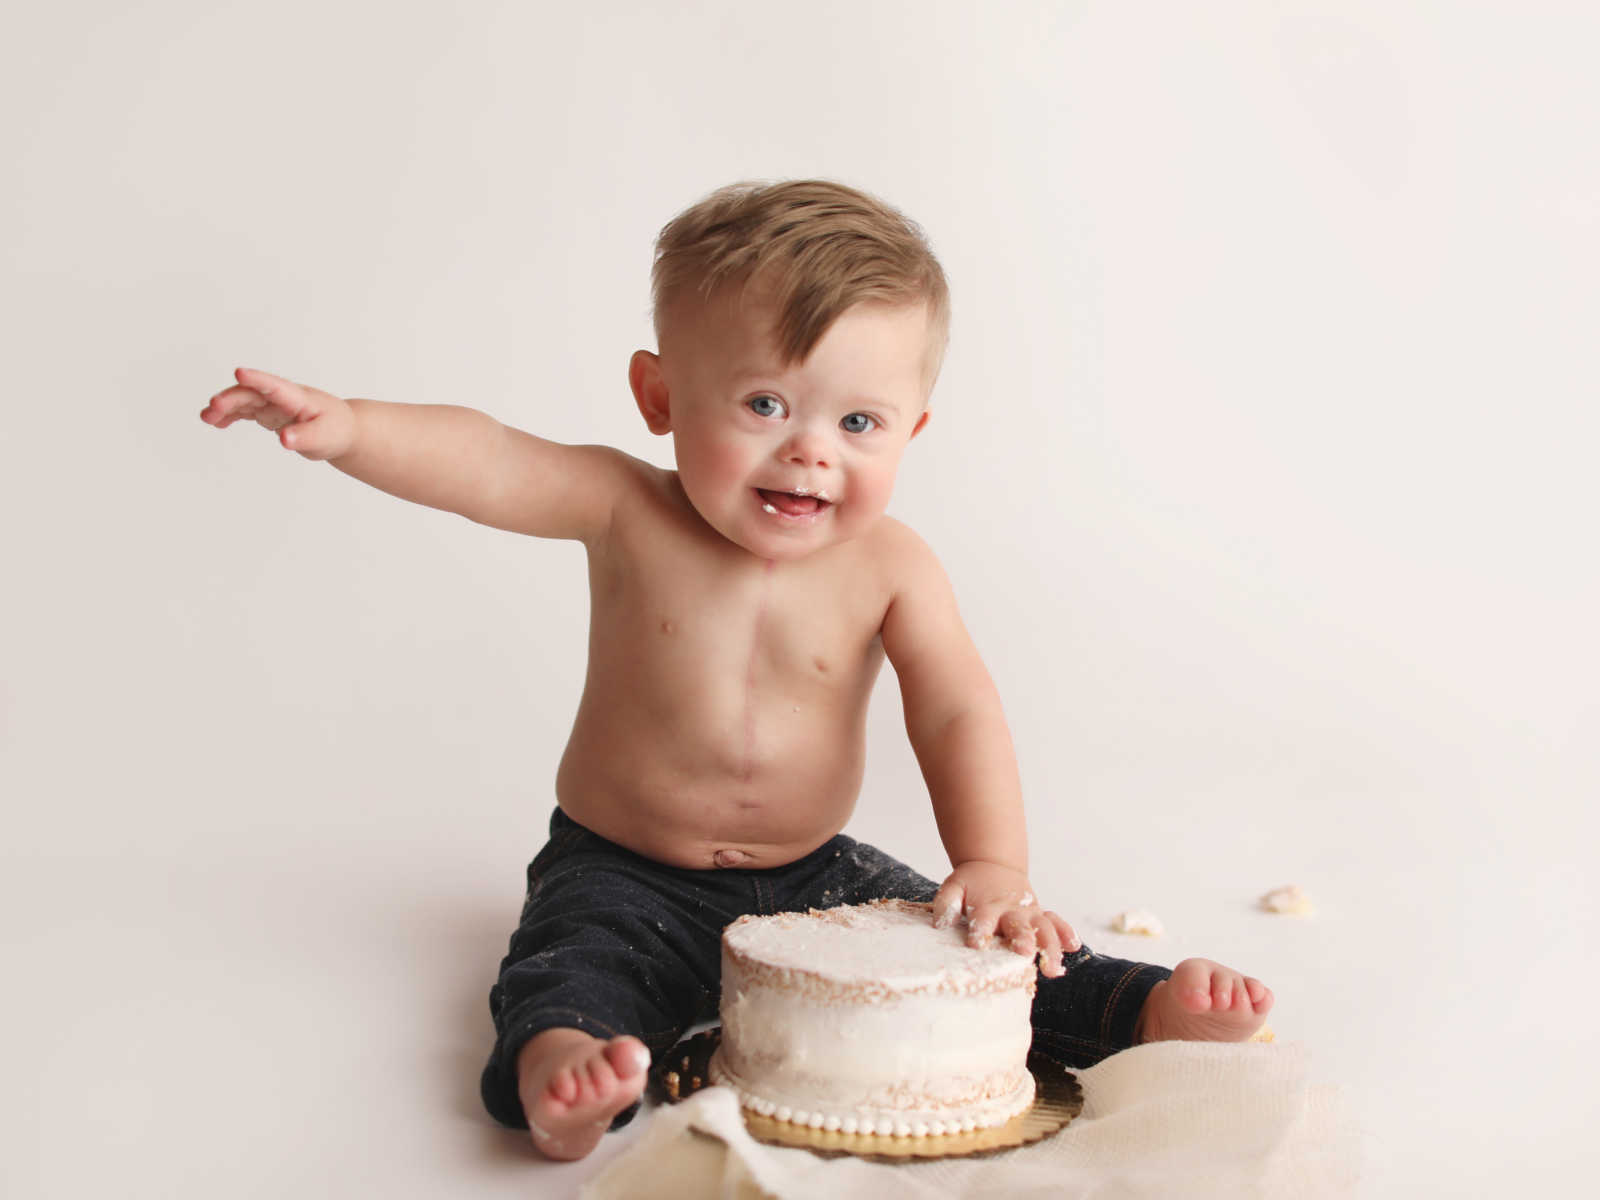 Shirtless down syndrome baby eating cake with his hands